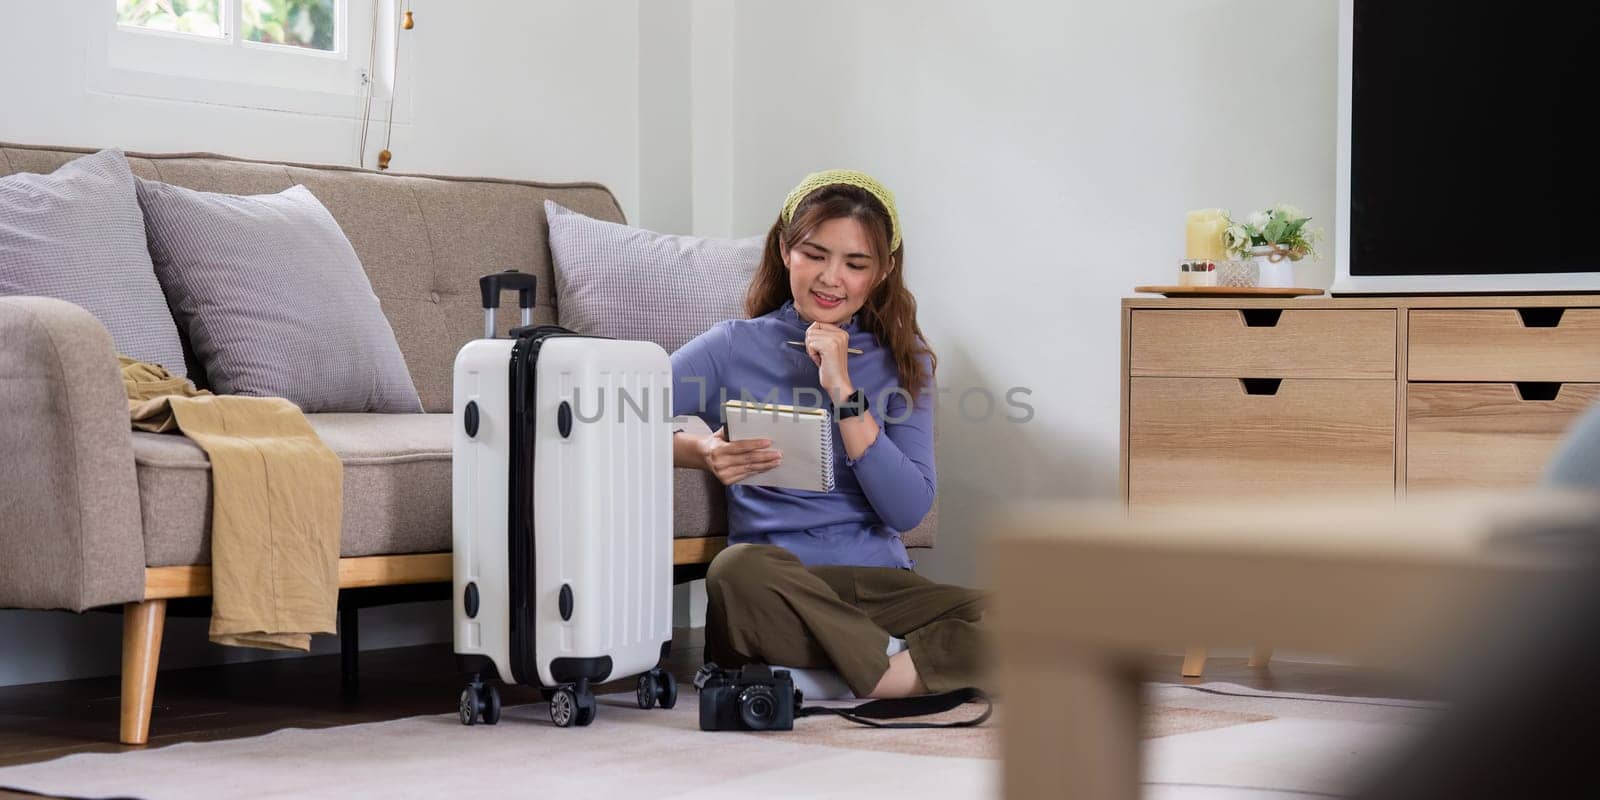 Woman packing a suitcase for a new travel trip. bag and luggage for journey.